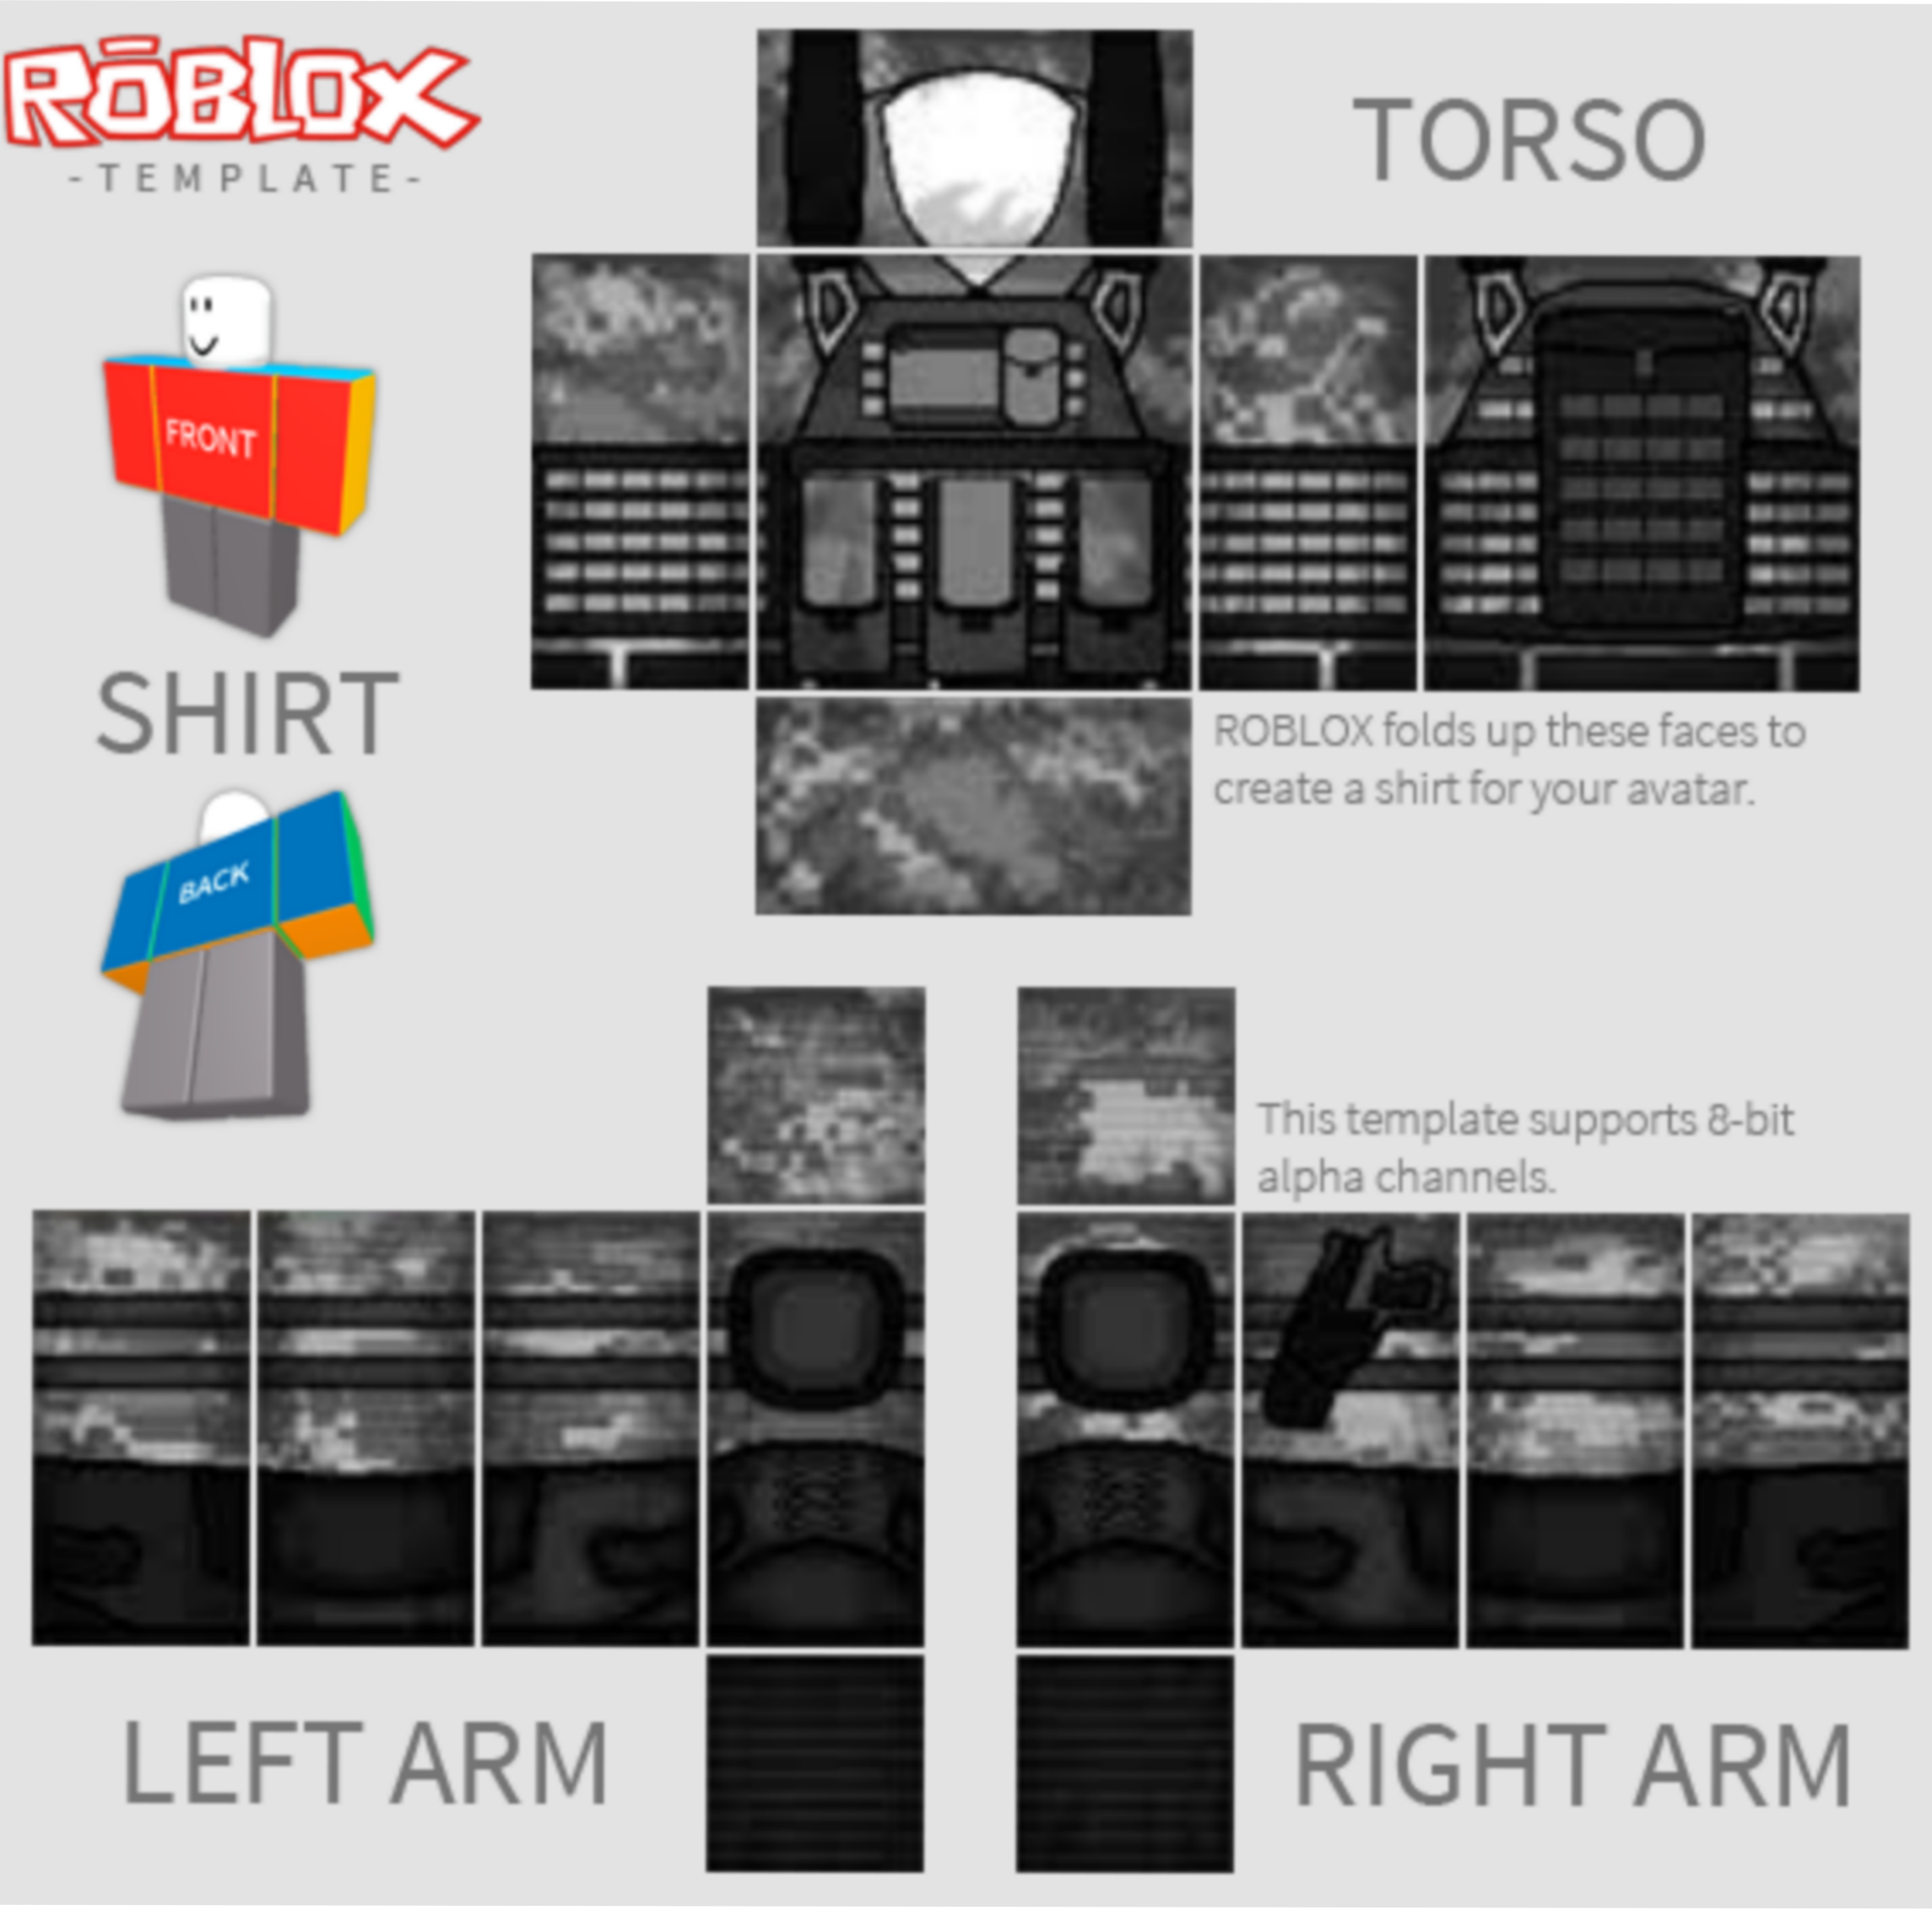 Roblox Template Swat Shirt Image By Guicorreia13795 - roblox clothes template generator